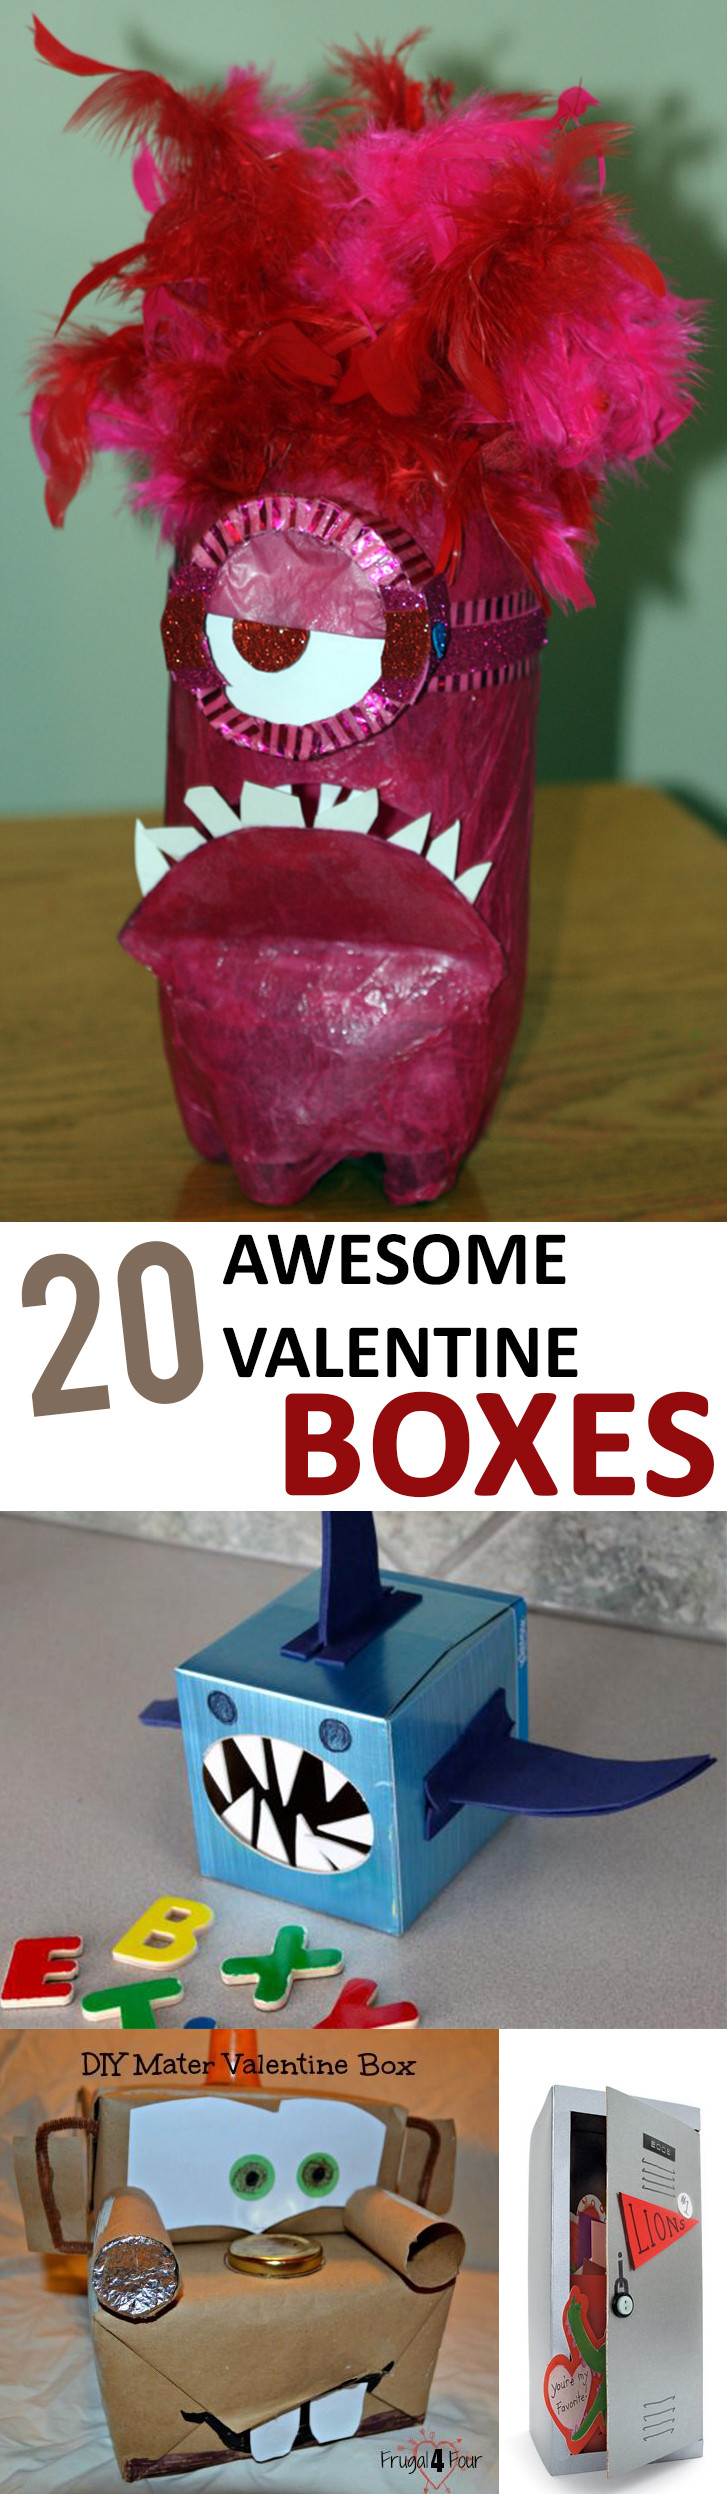 Cool Valentines Day Ideas
 20 Awesome Valentine Boxes